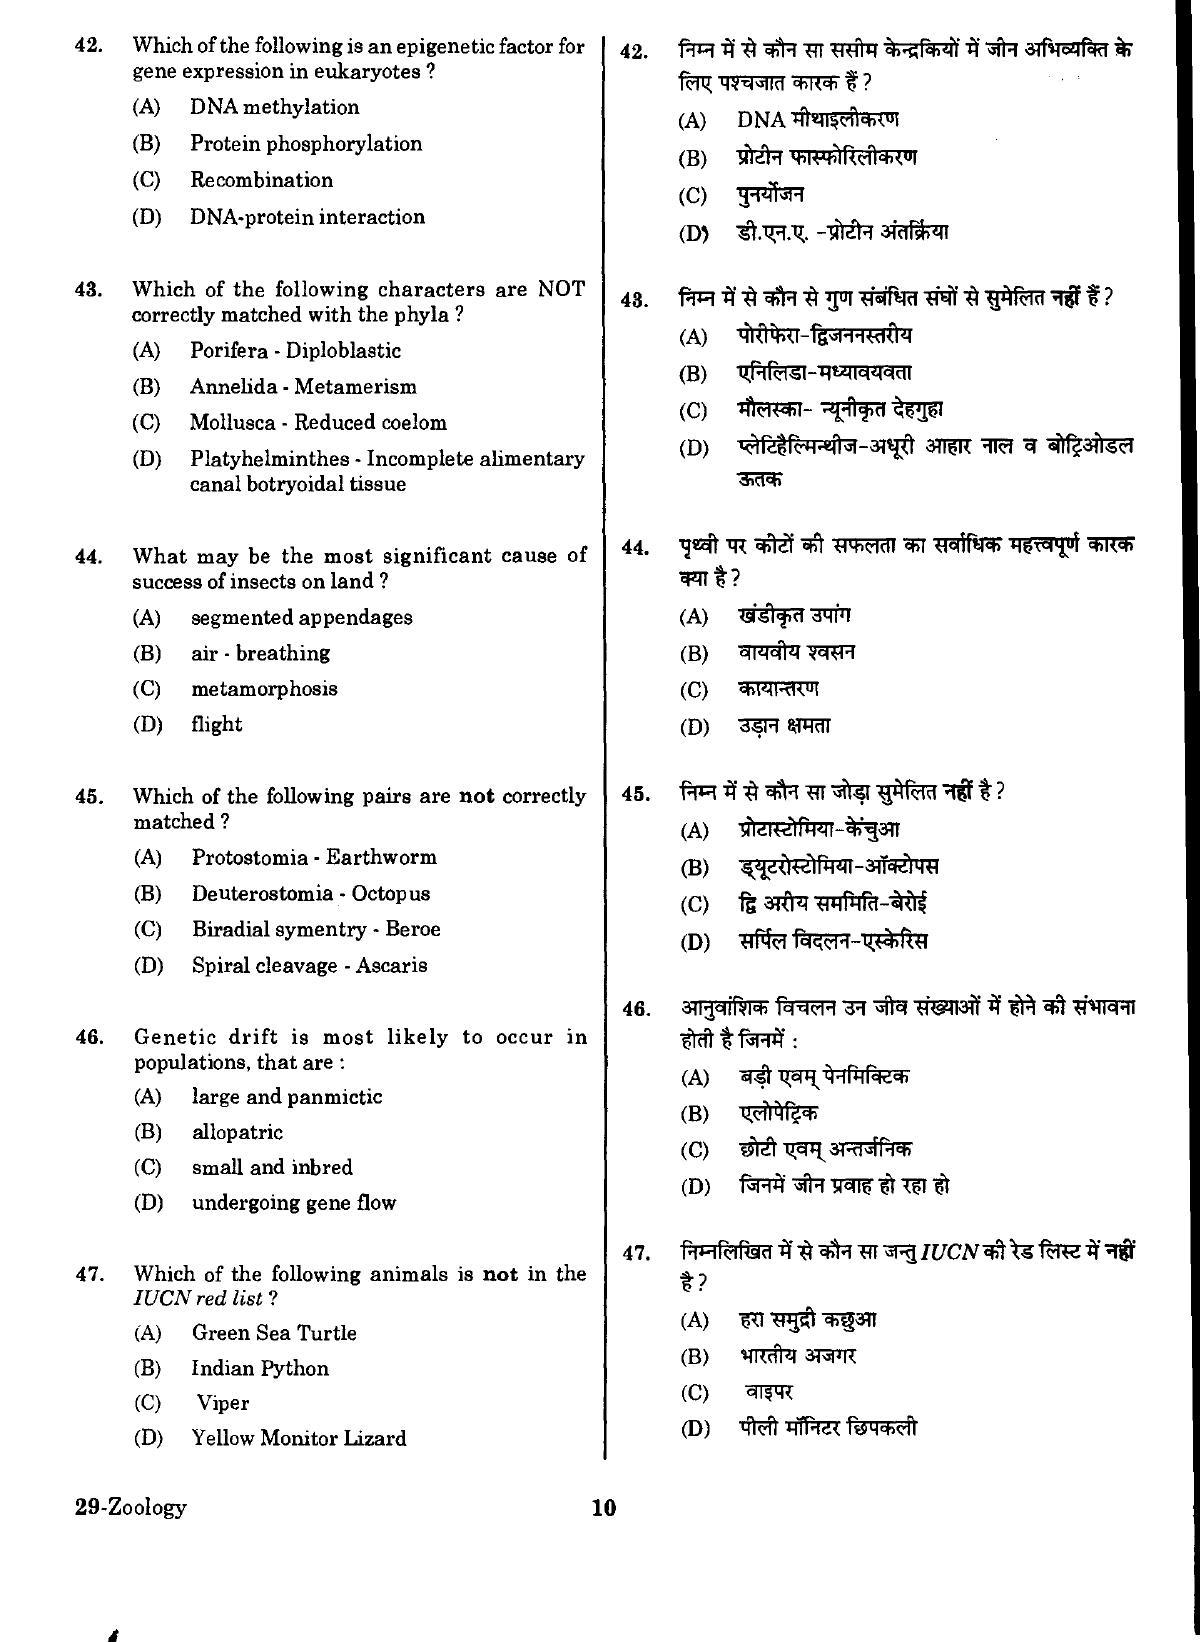 URATPG Zoology Sample Question Paper 2018 - Page 9